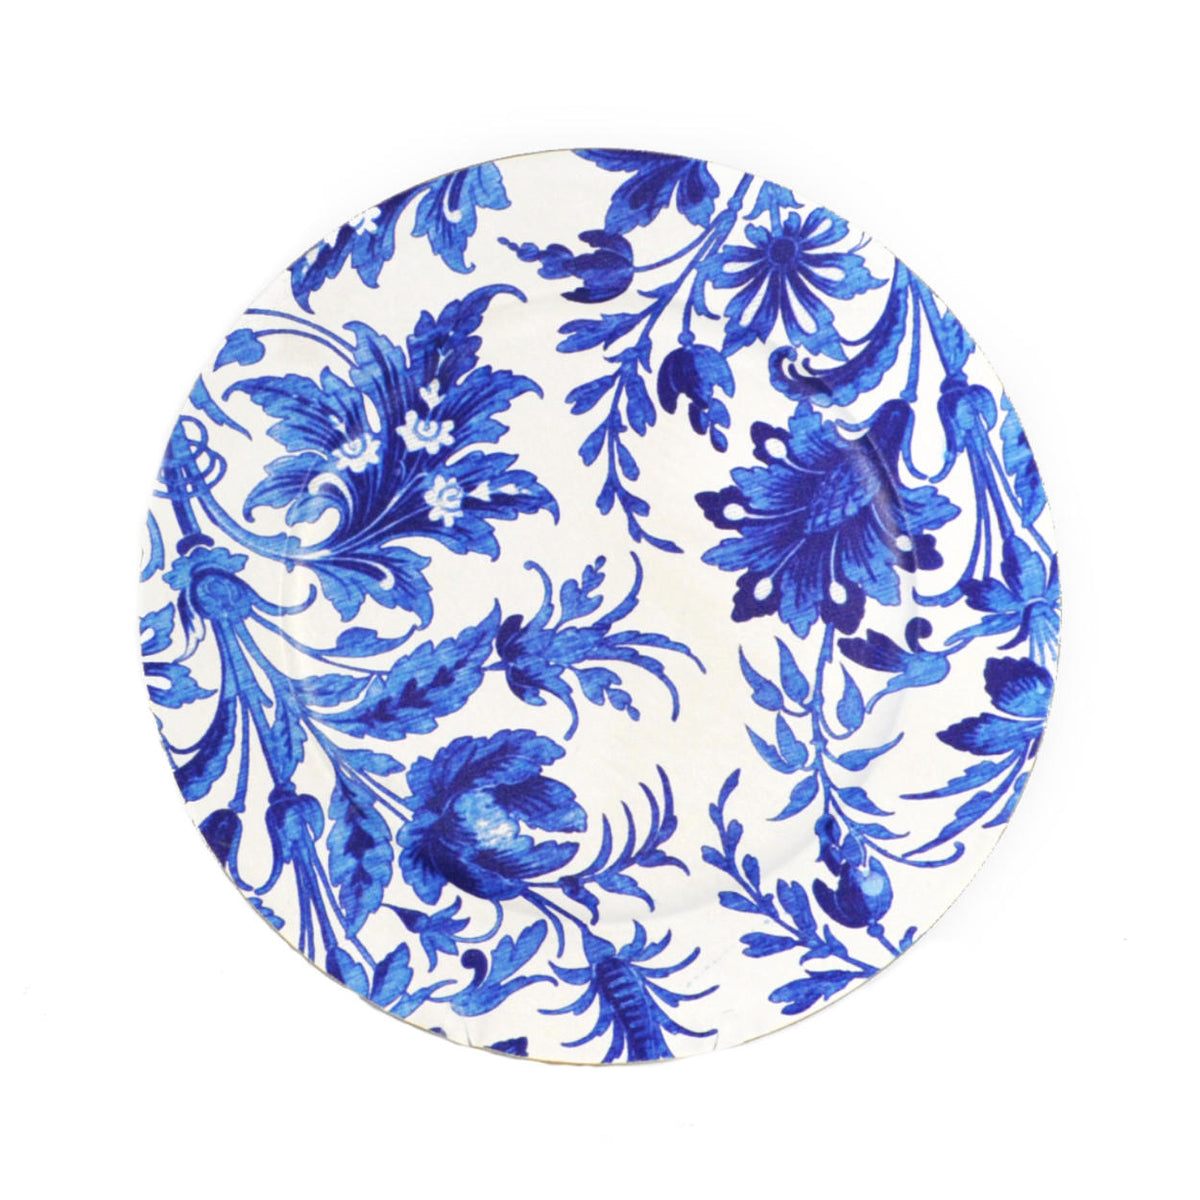 Blue Patterned Charger Plate